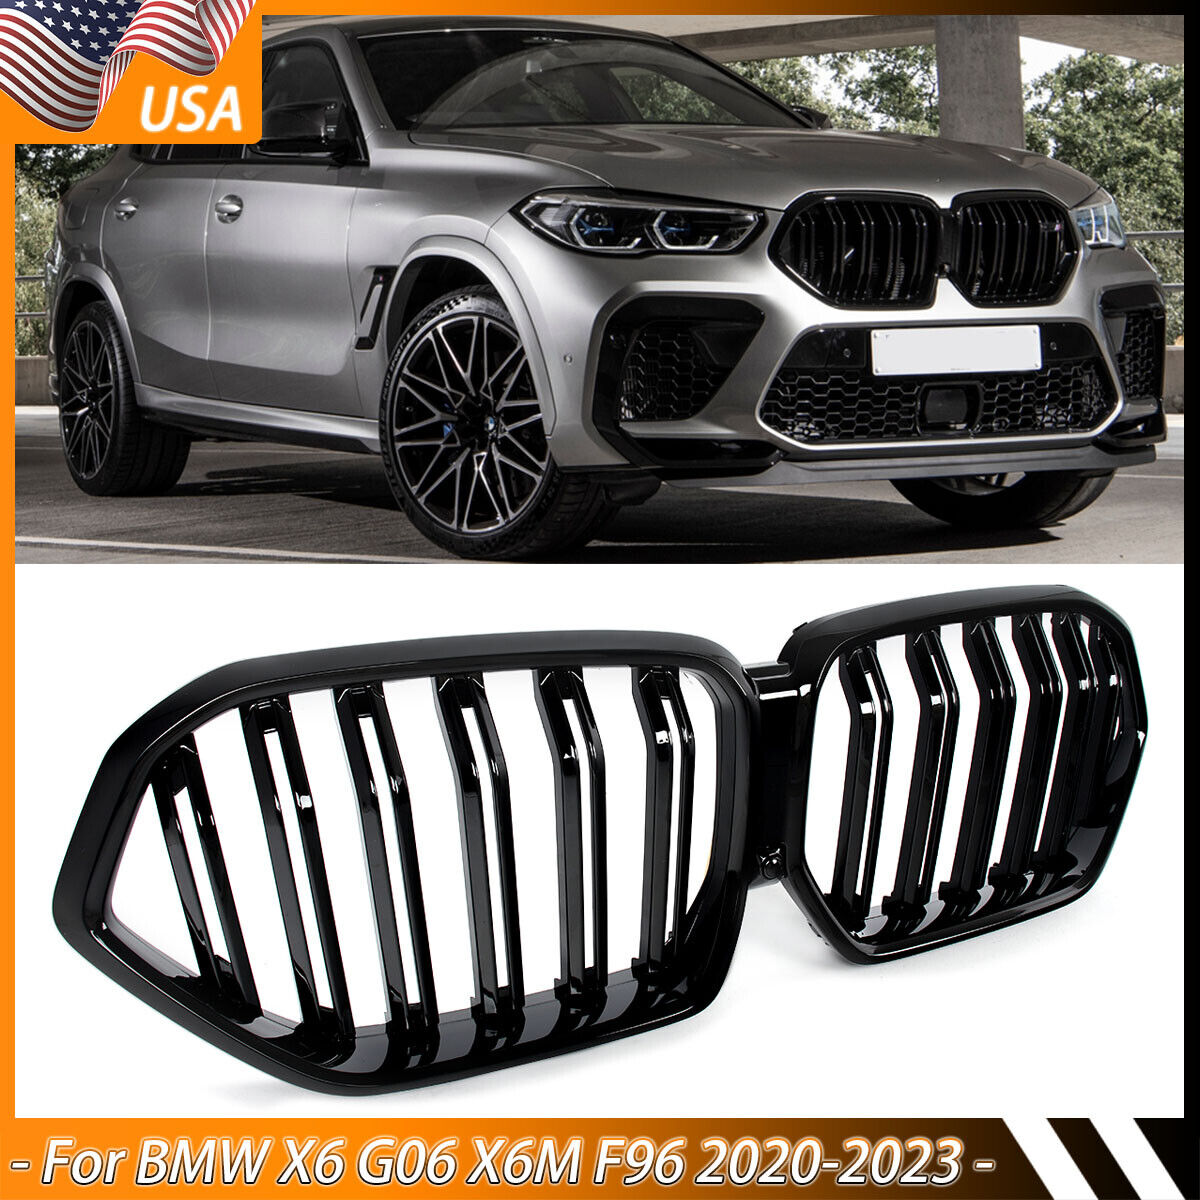 For BMW X6 G06 X6M F96 2020-2023 Gloss Black Daul Slat Front Kidney Grill Grille